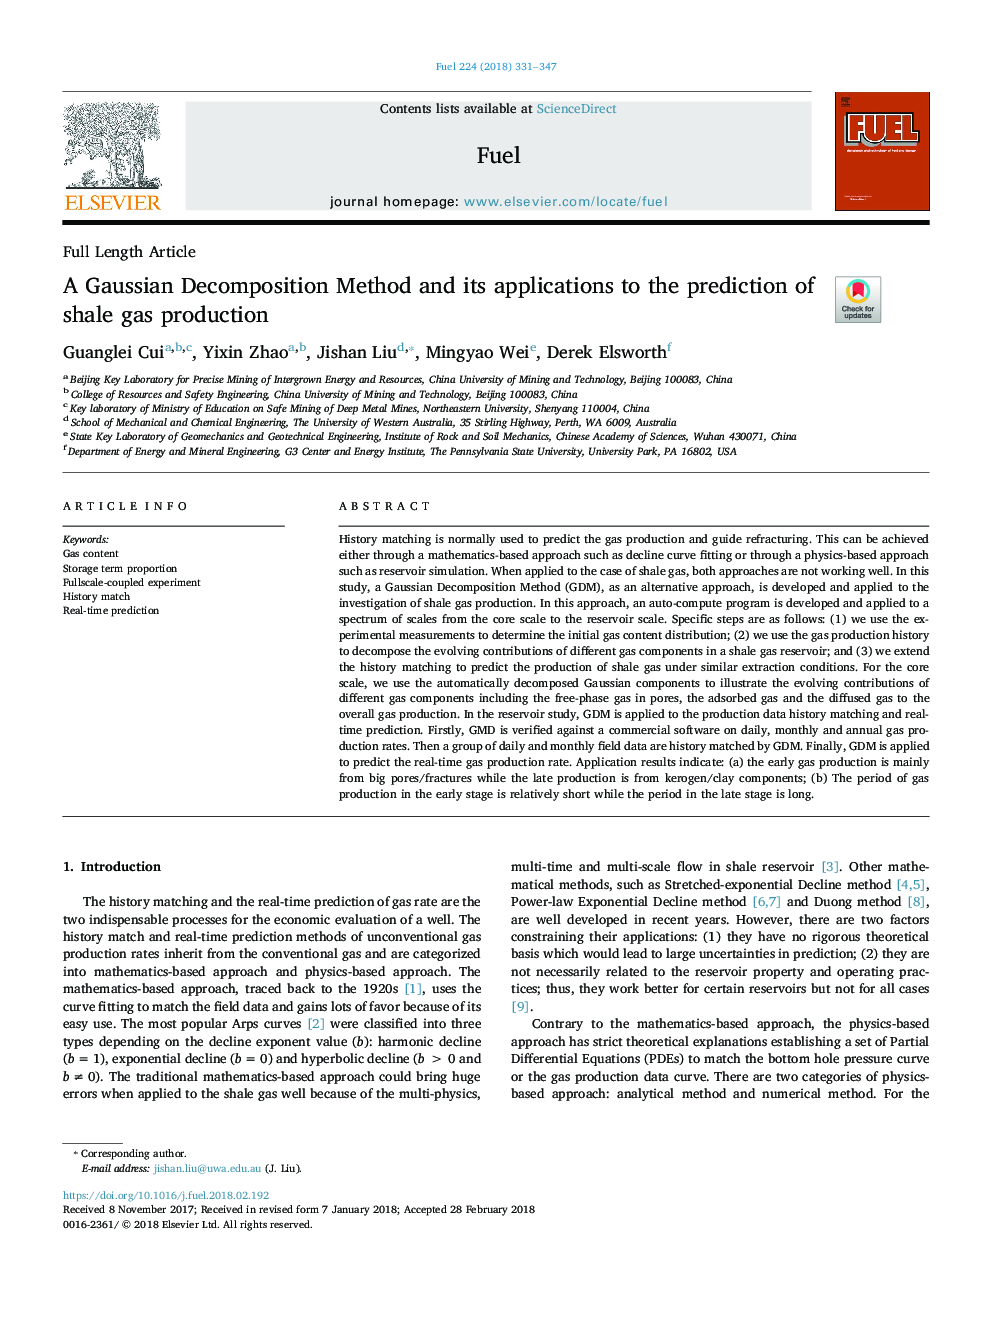 A Gaussian Decomposition Method and its applications to the prediction of shale gas production